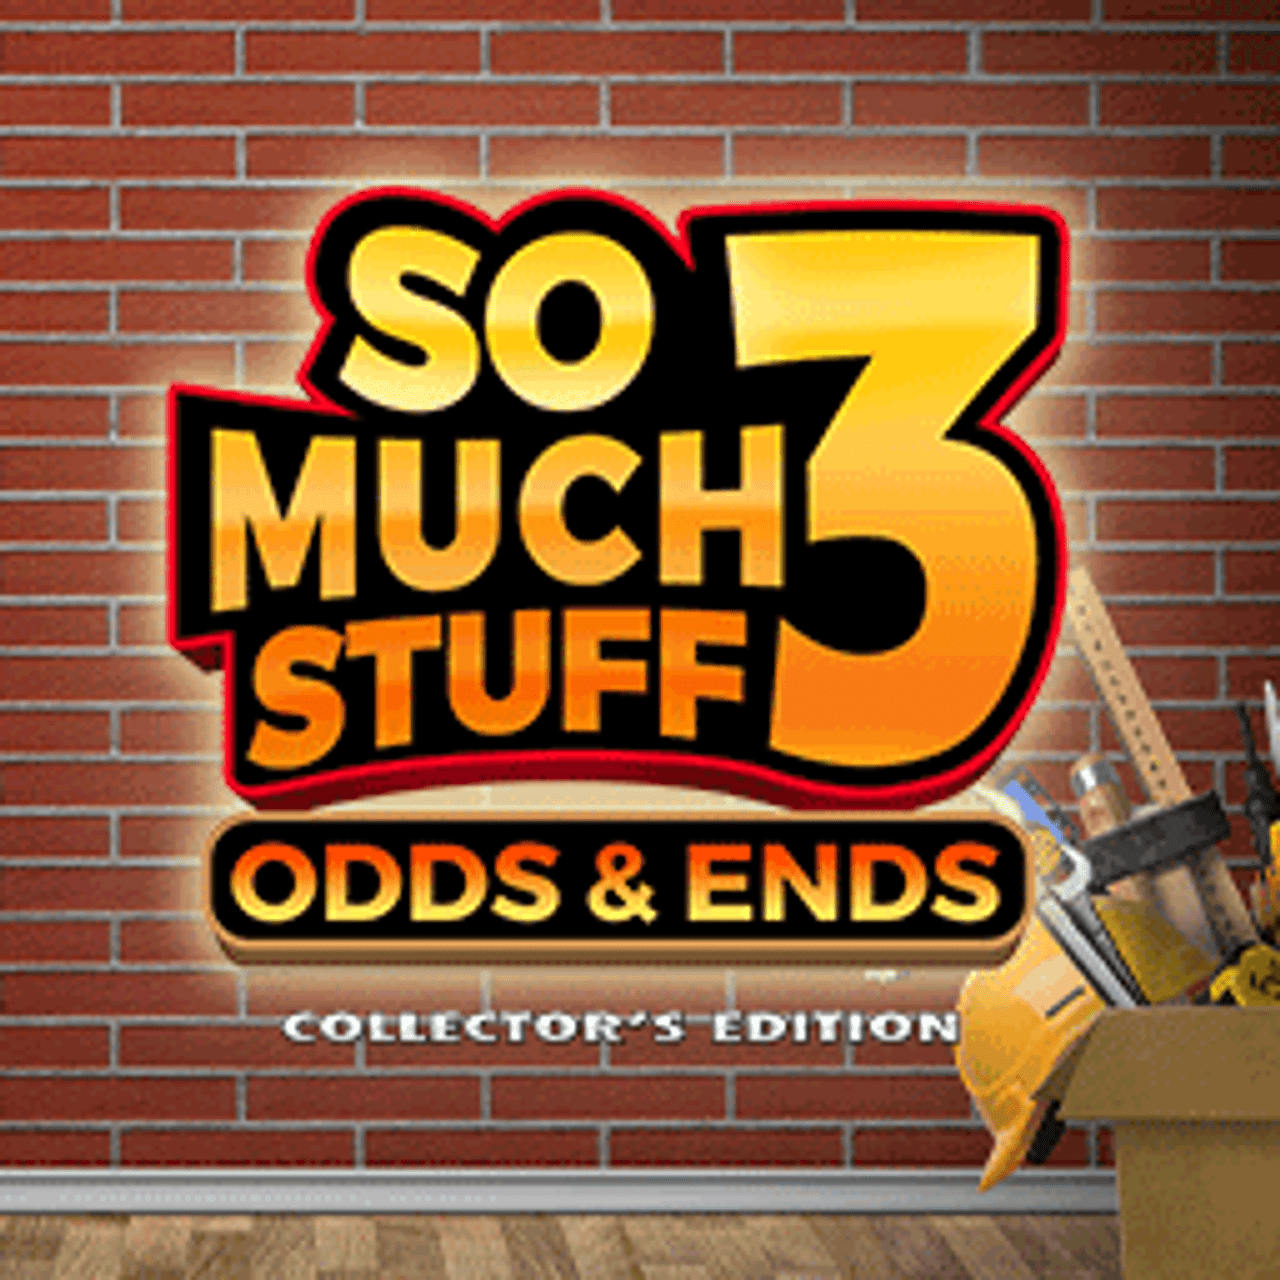 So Much Stuff 3 Collector's Edition